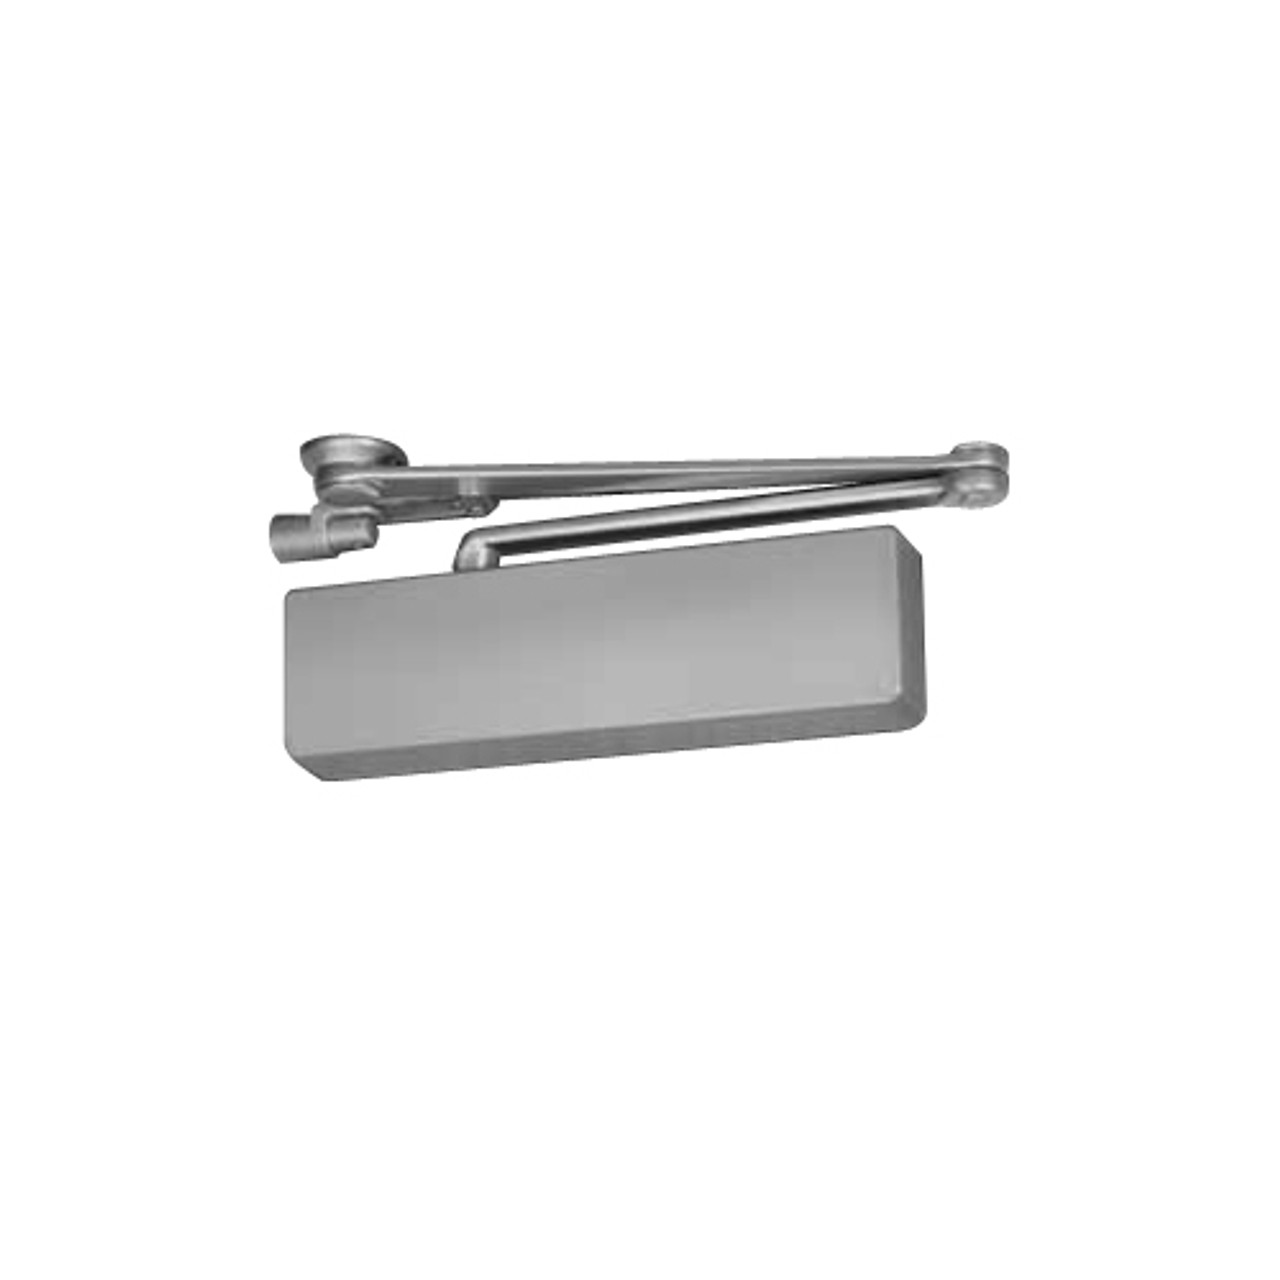 CPS7570T-689-LH Norton 7570 Series Security Door CloserPlus Spring Arm with Thumbturn Hold Open in Aluminum Finish